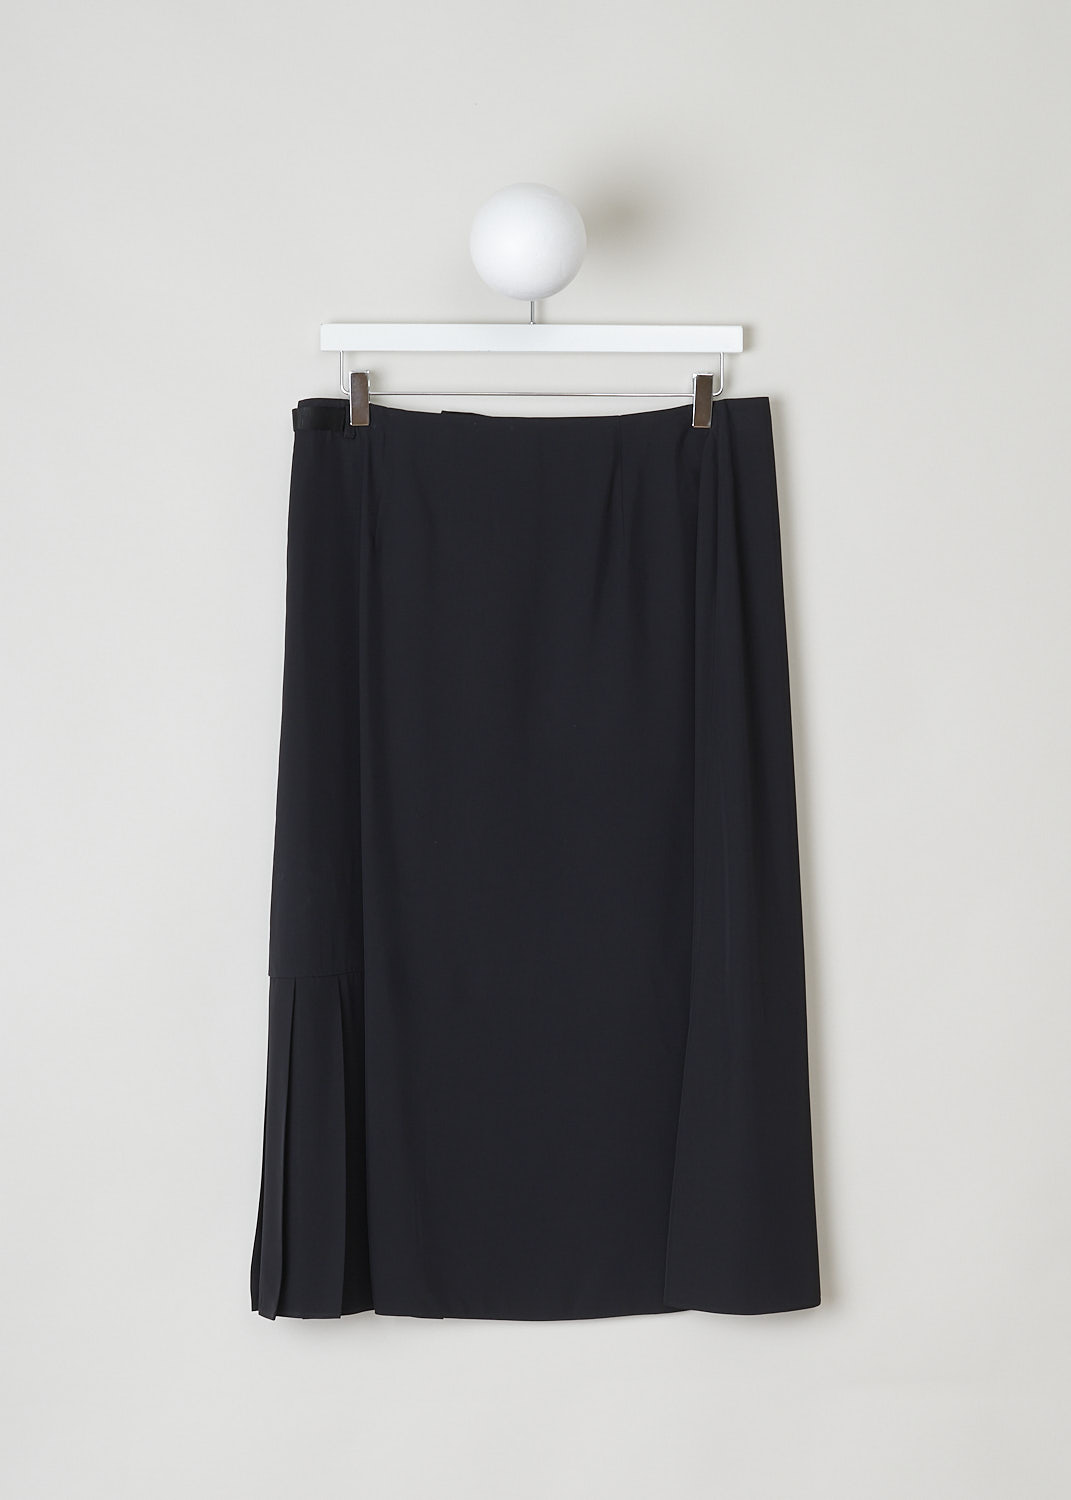 Prada, Black wrap skirt, twill_fluido_P197N_F0002_nero, black, back, A lovely black wrap skirt comes with a side-release buckle fastener which gives this model a sturdy and tough look. Furthermore knife pleats decorate the bottom half of this skirt. 